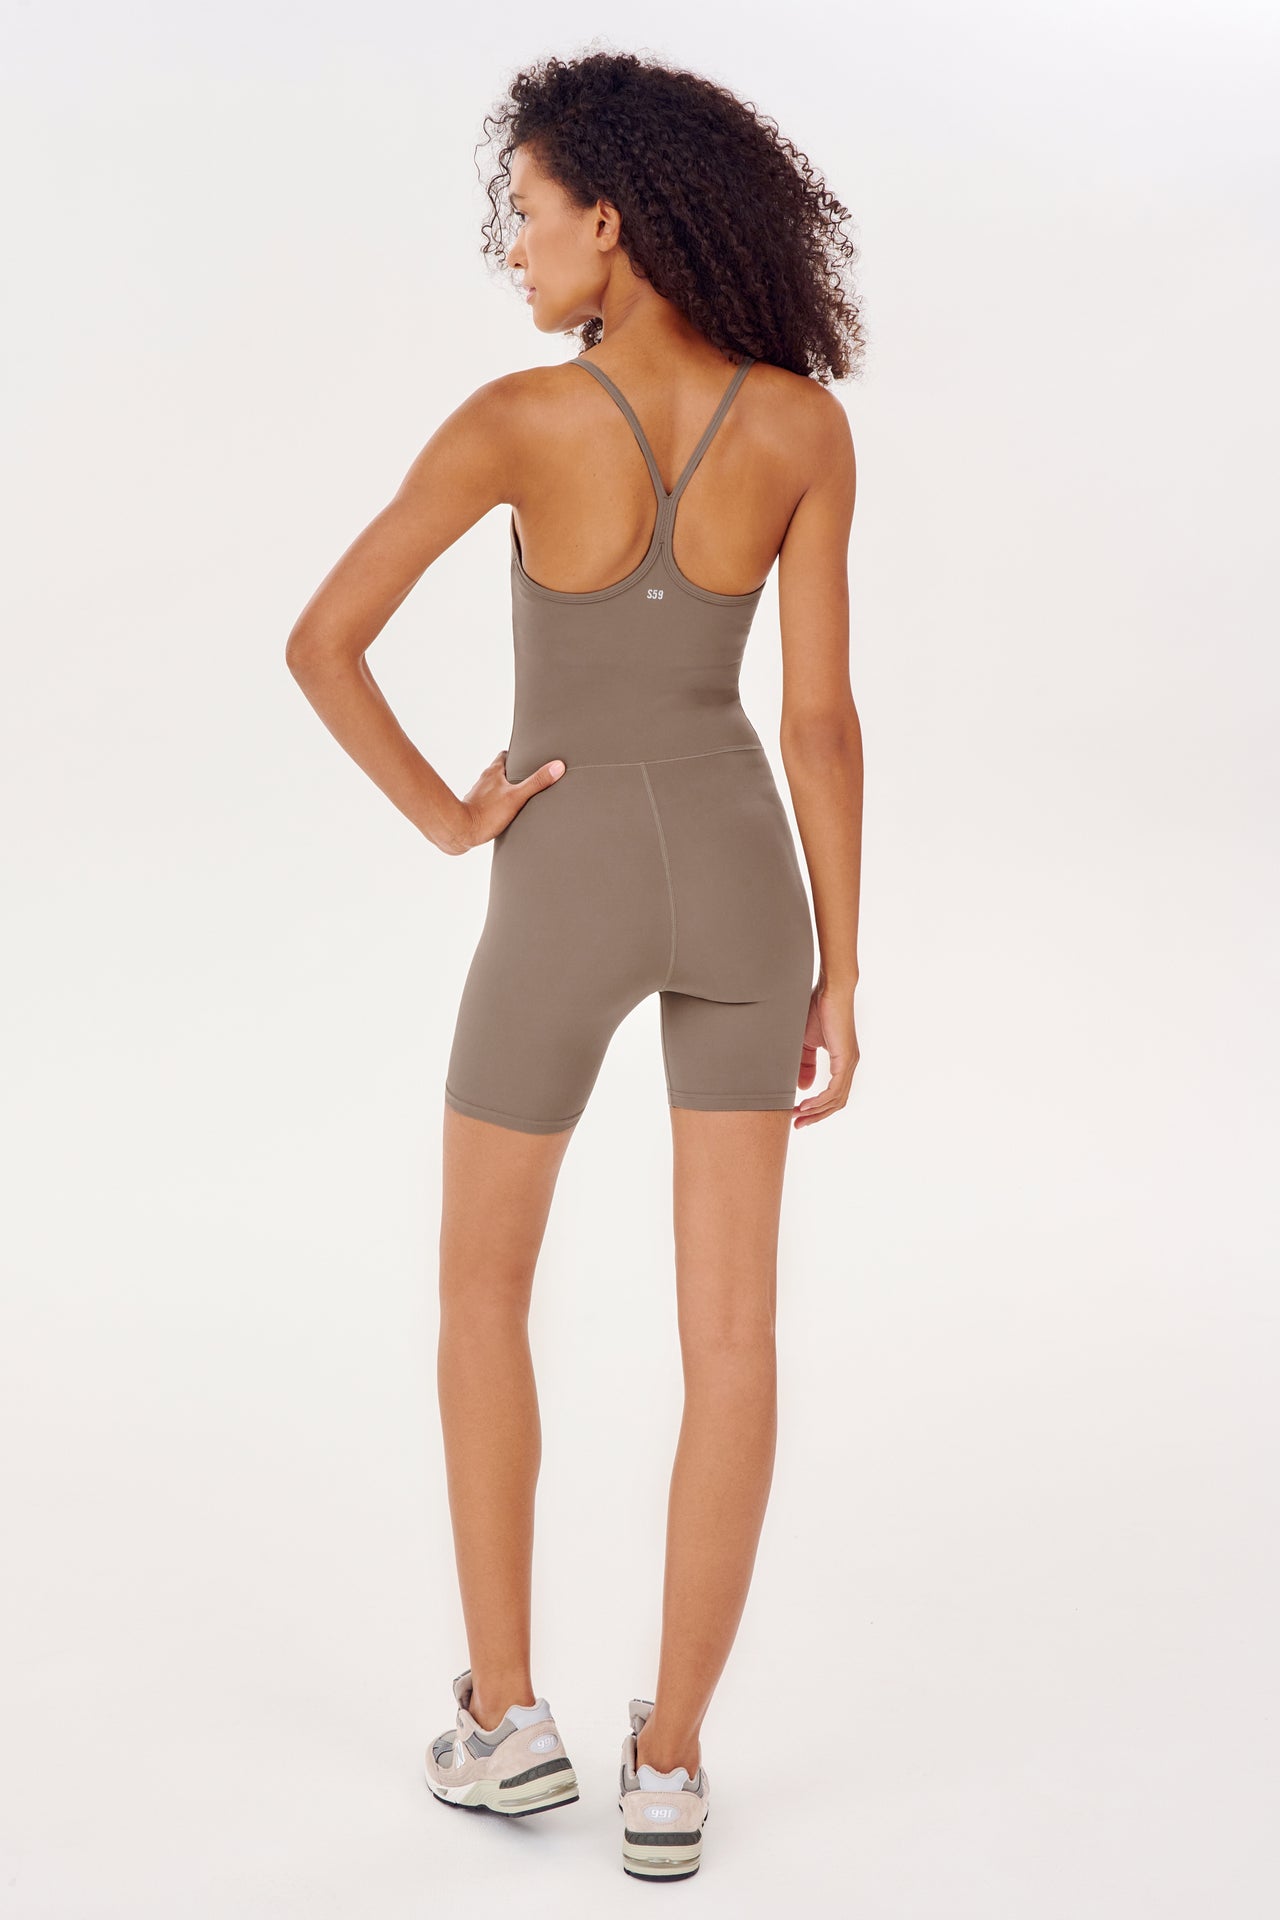 The back view of a woman in a SPLITS59 Airweight 6” Short Jumpsuit - Lentil.